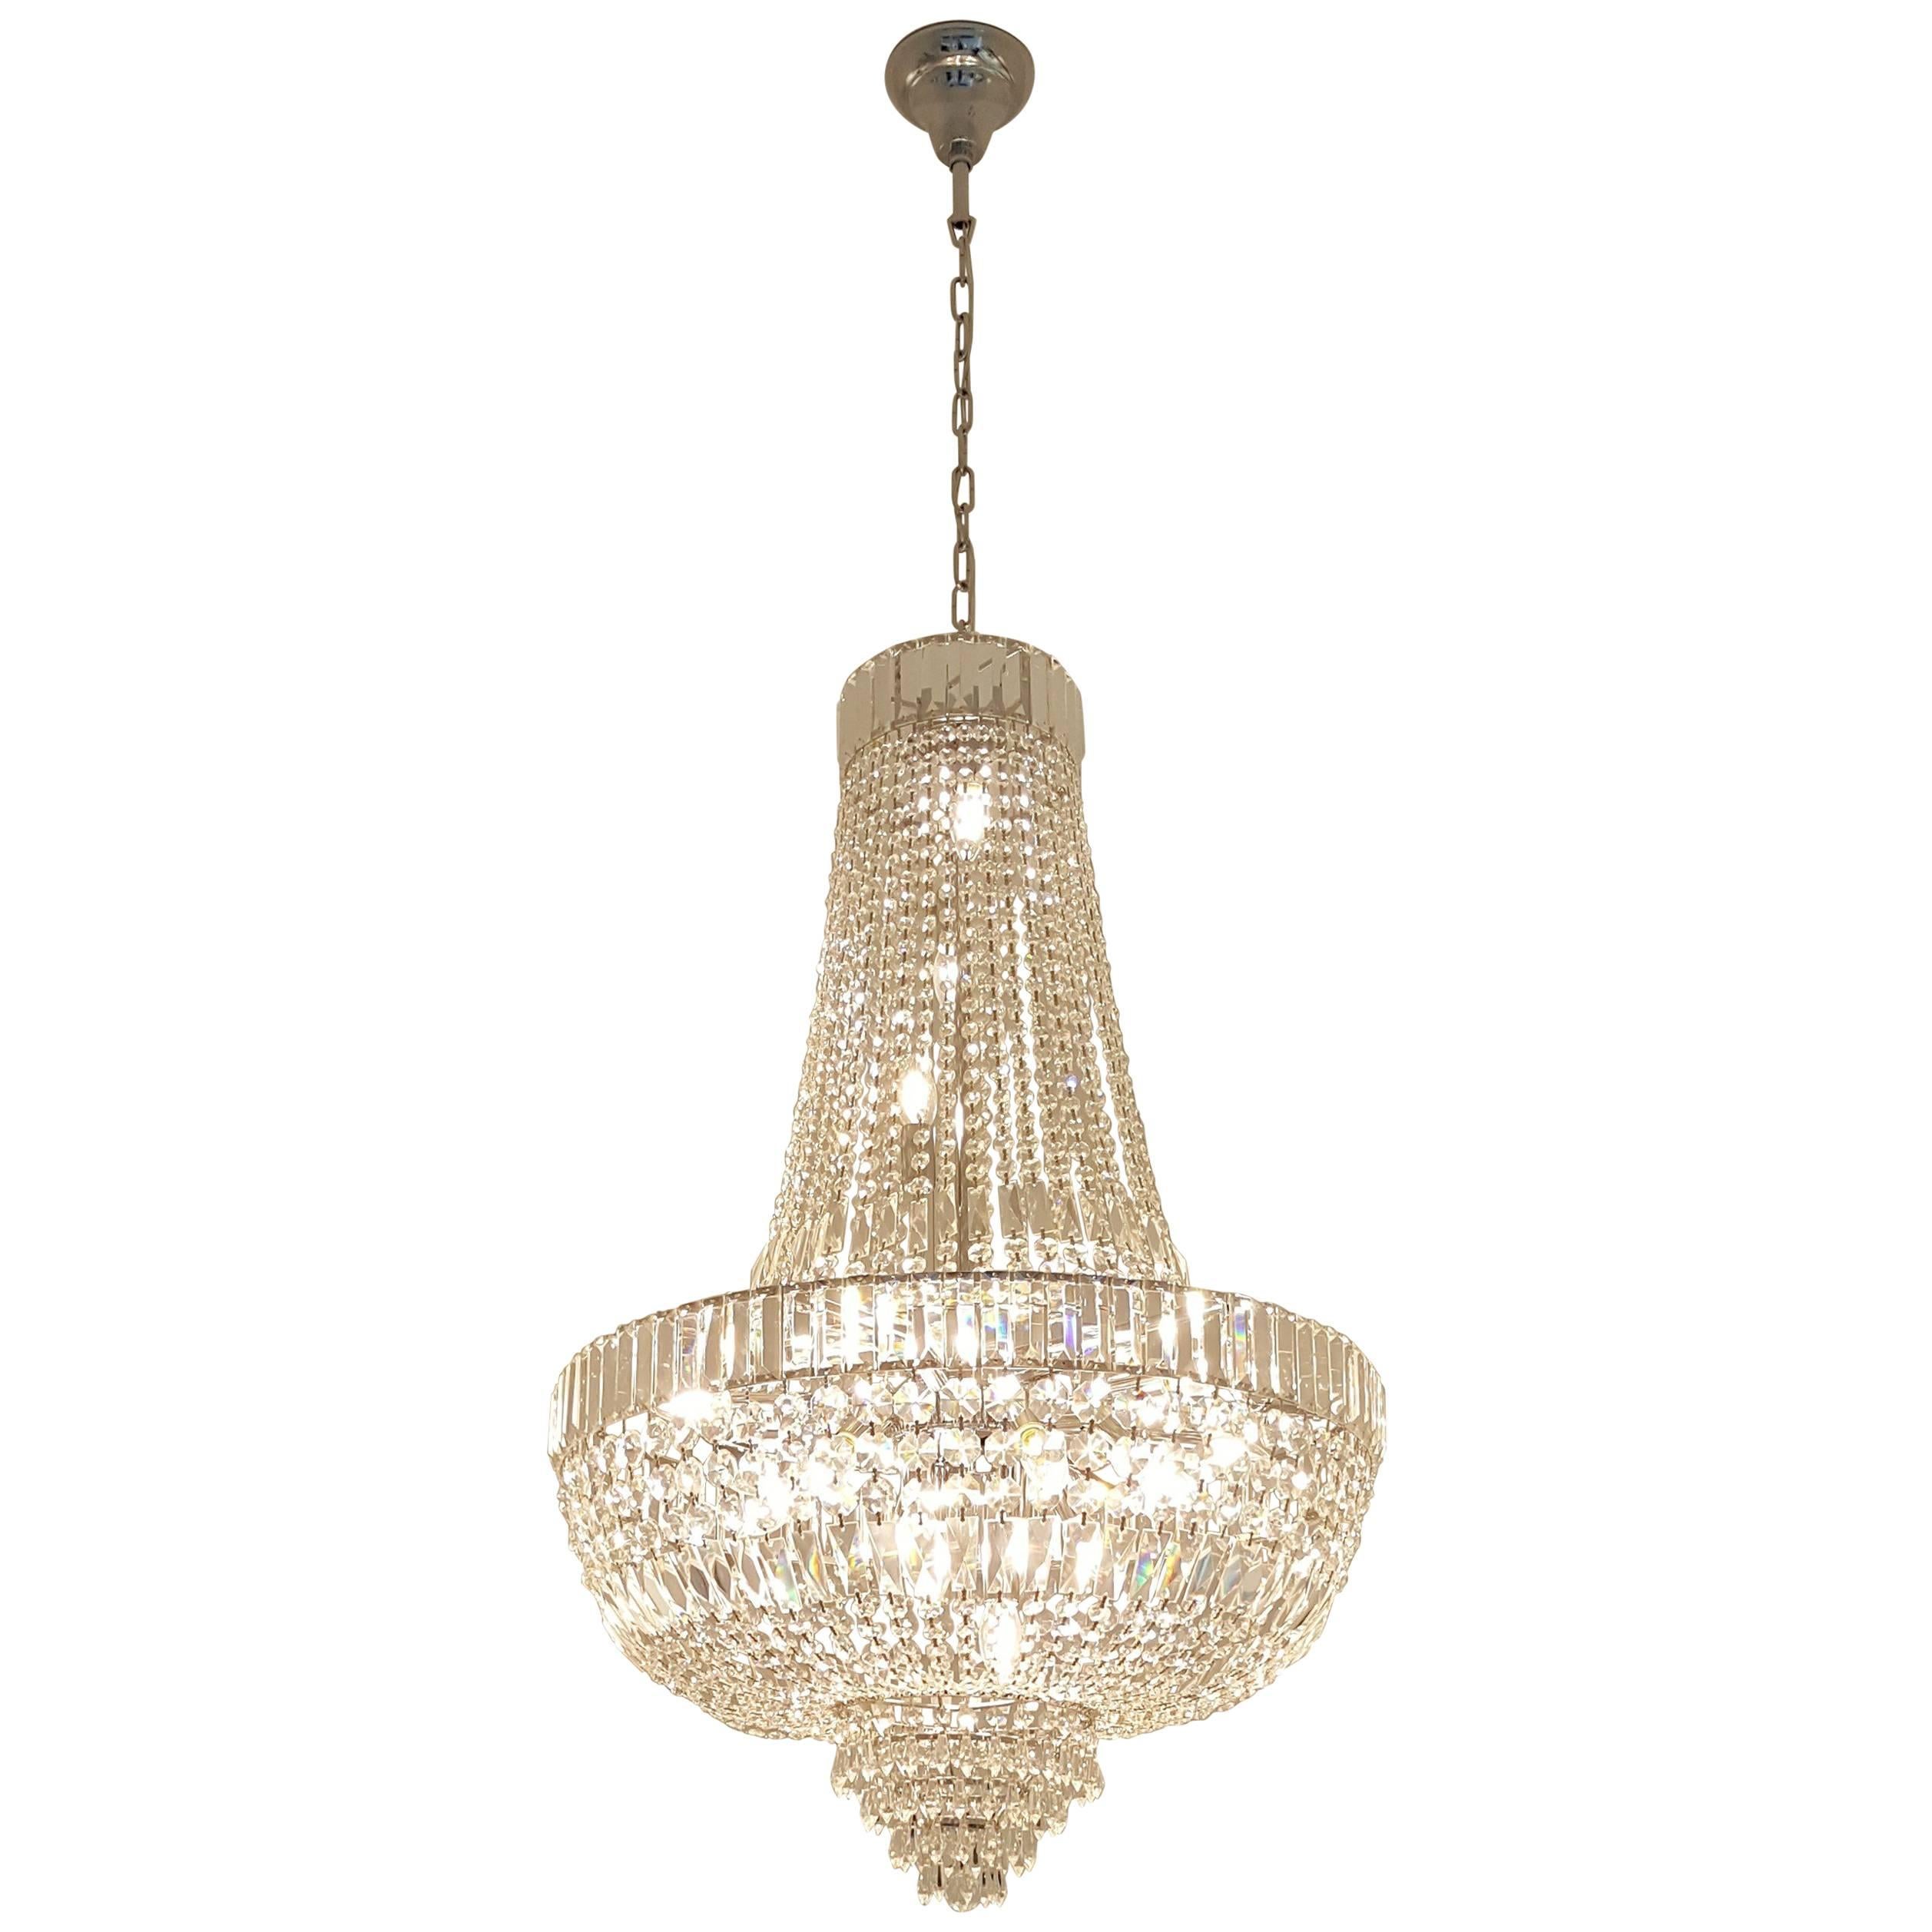 Art Deco Style Crystal Chandelier Empire Sac a Pearl Palace Lamp Chrome For Sale